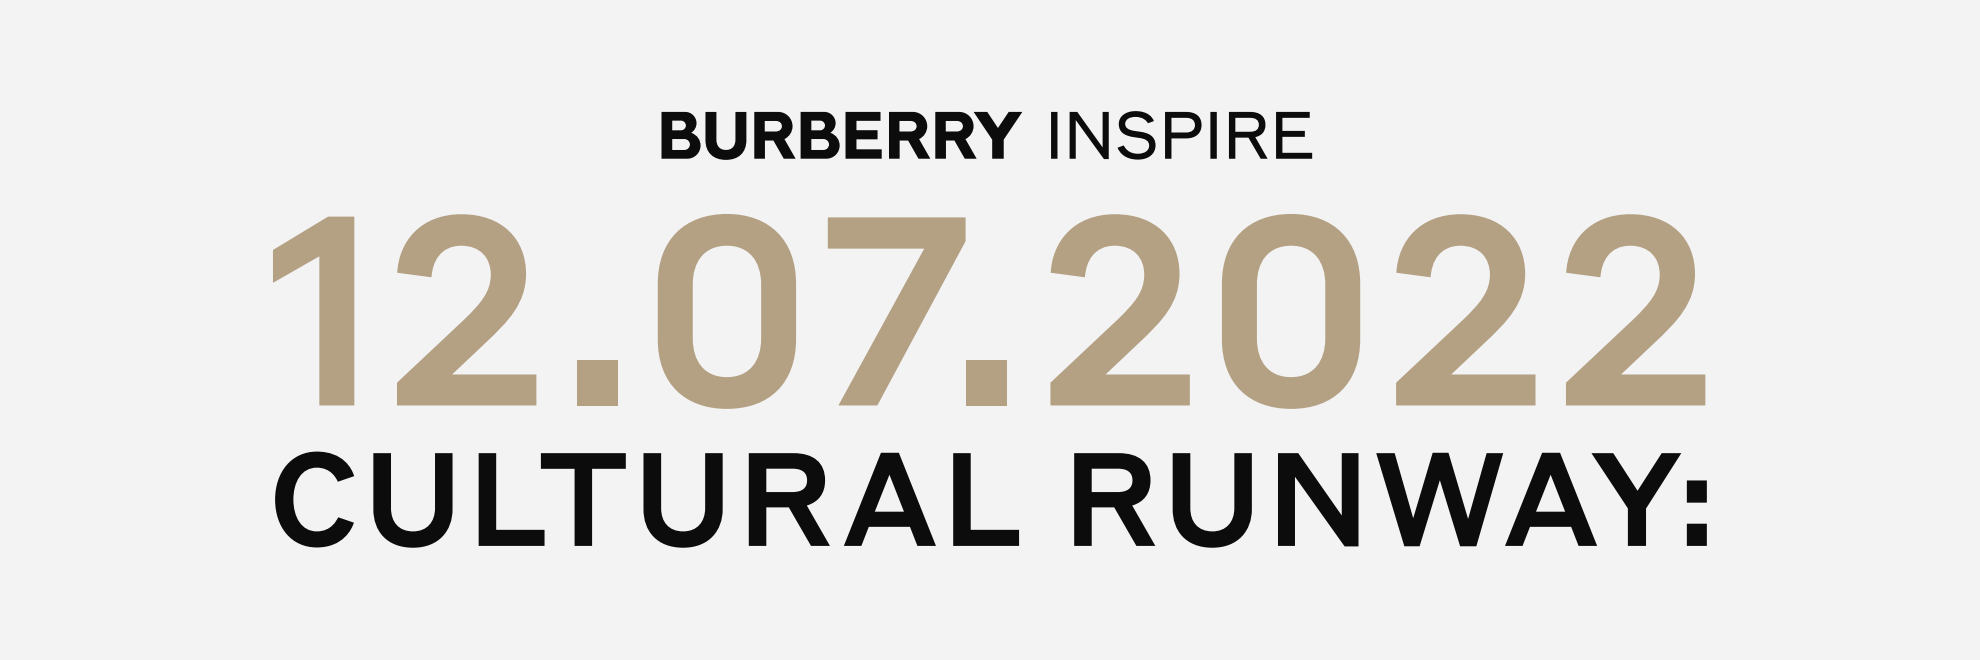 Burberry Inspire Cultural Runway (event banner)